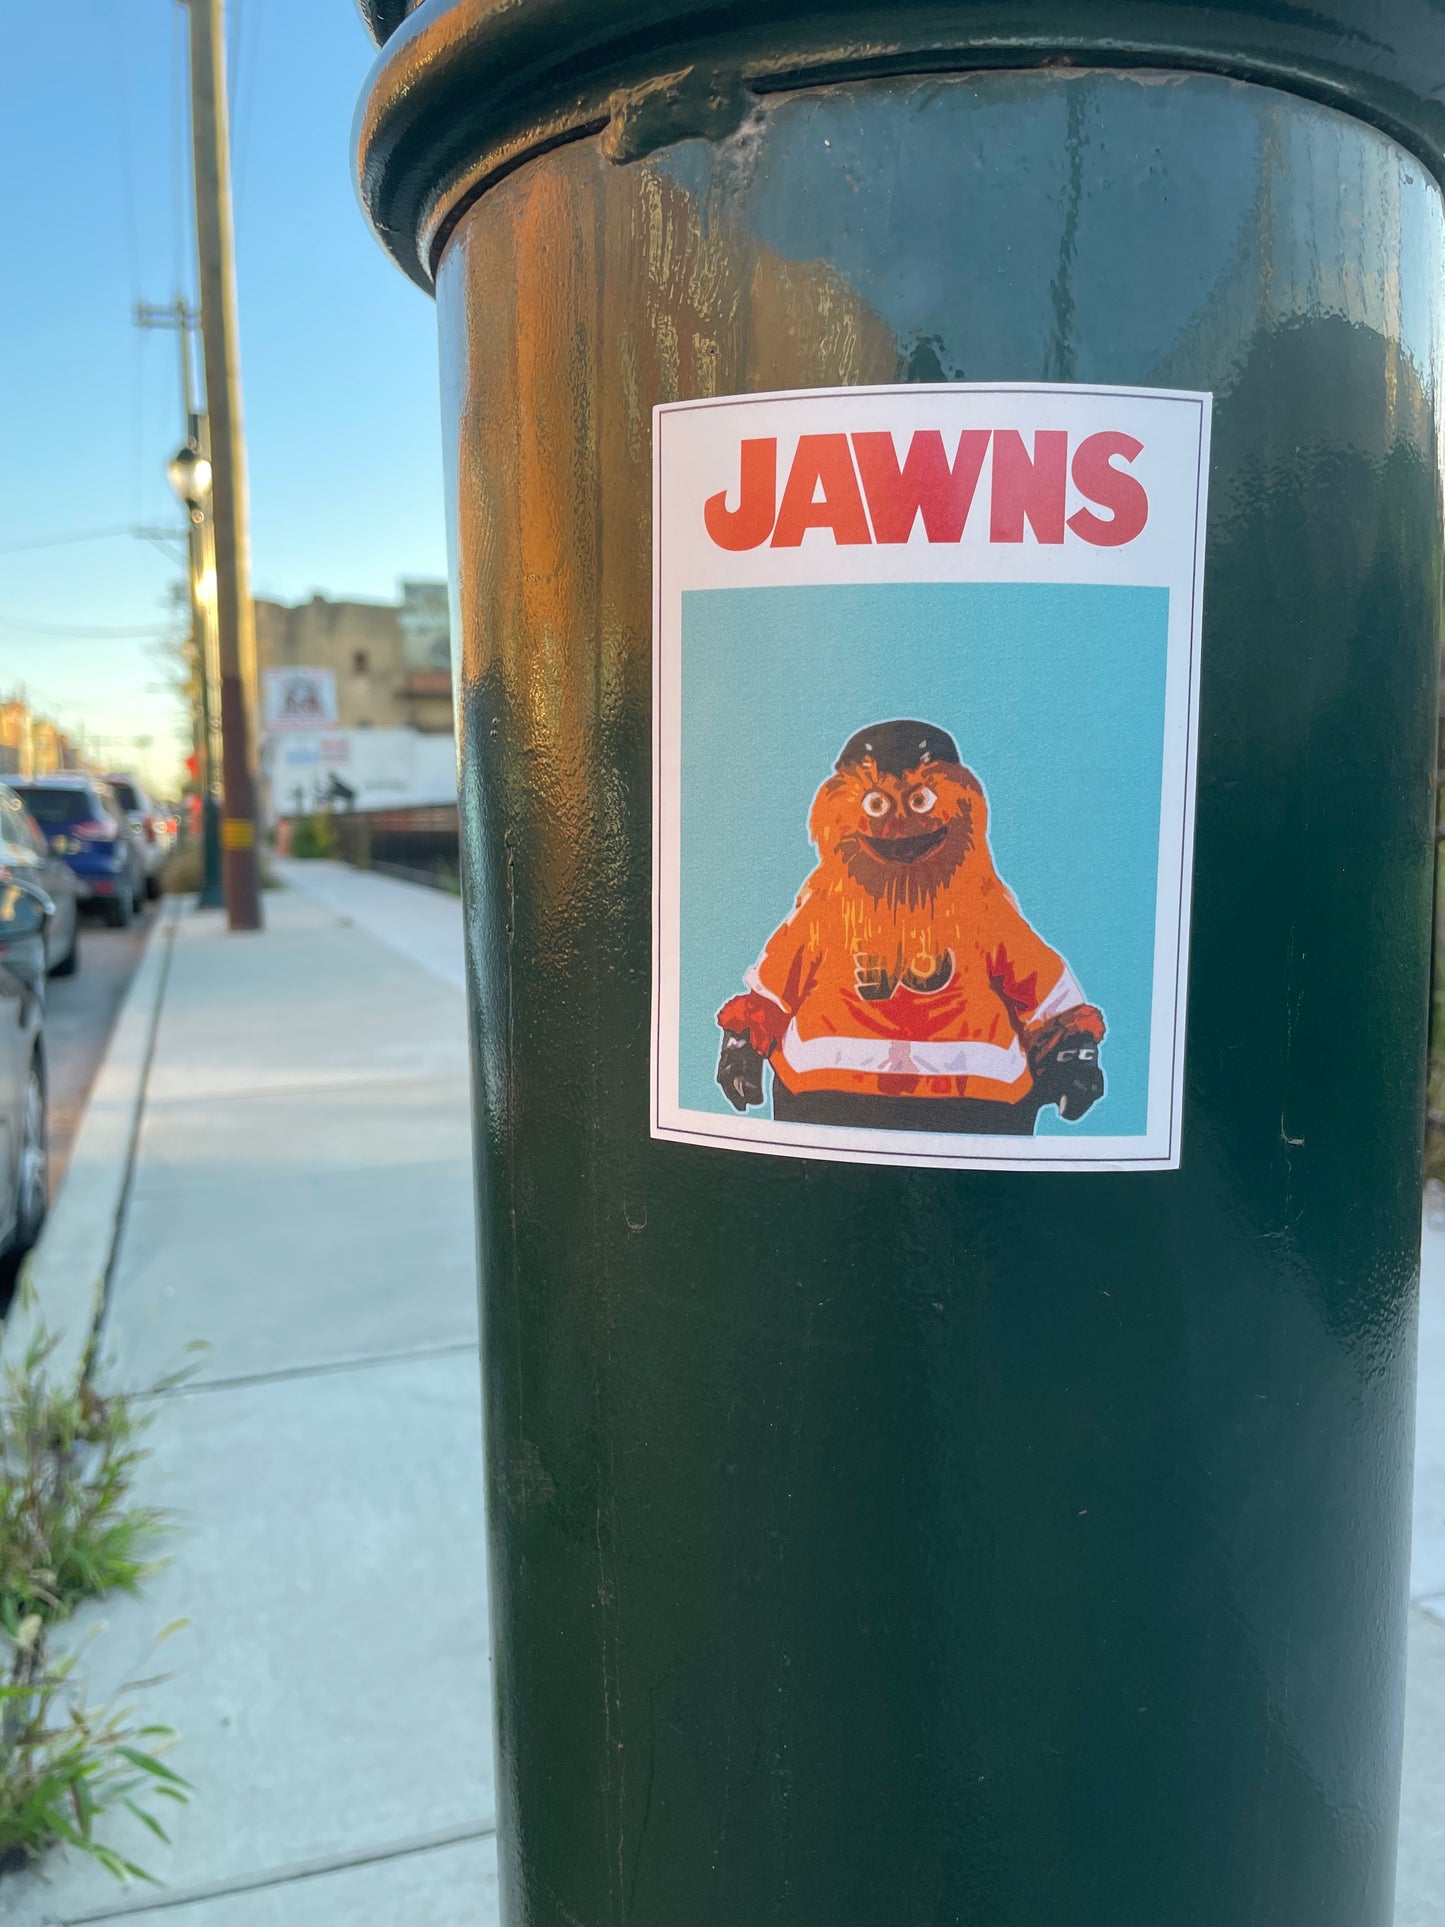 JAWNS (like Jaws) Gritty Stickers